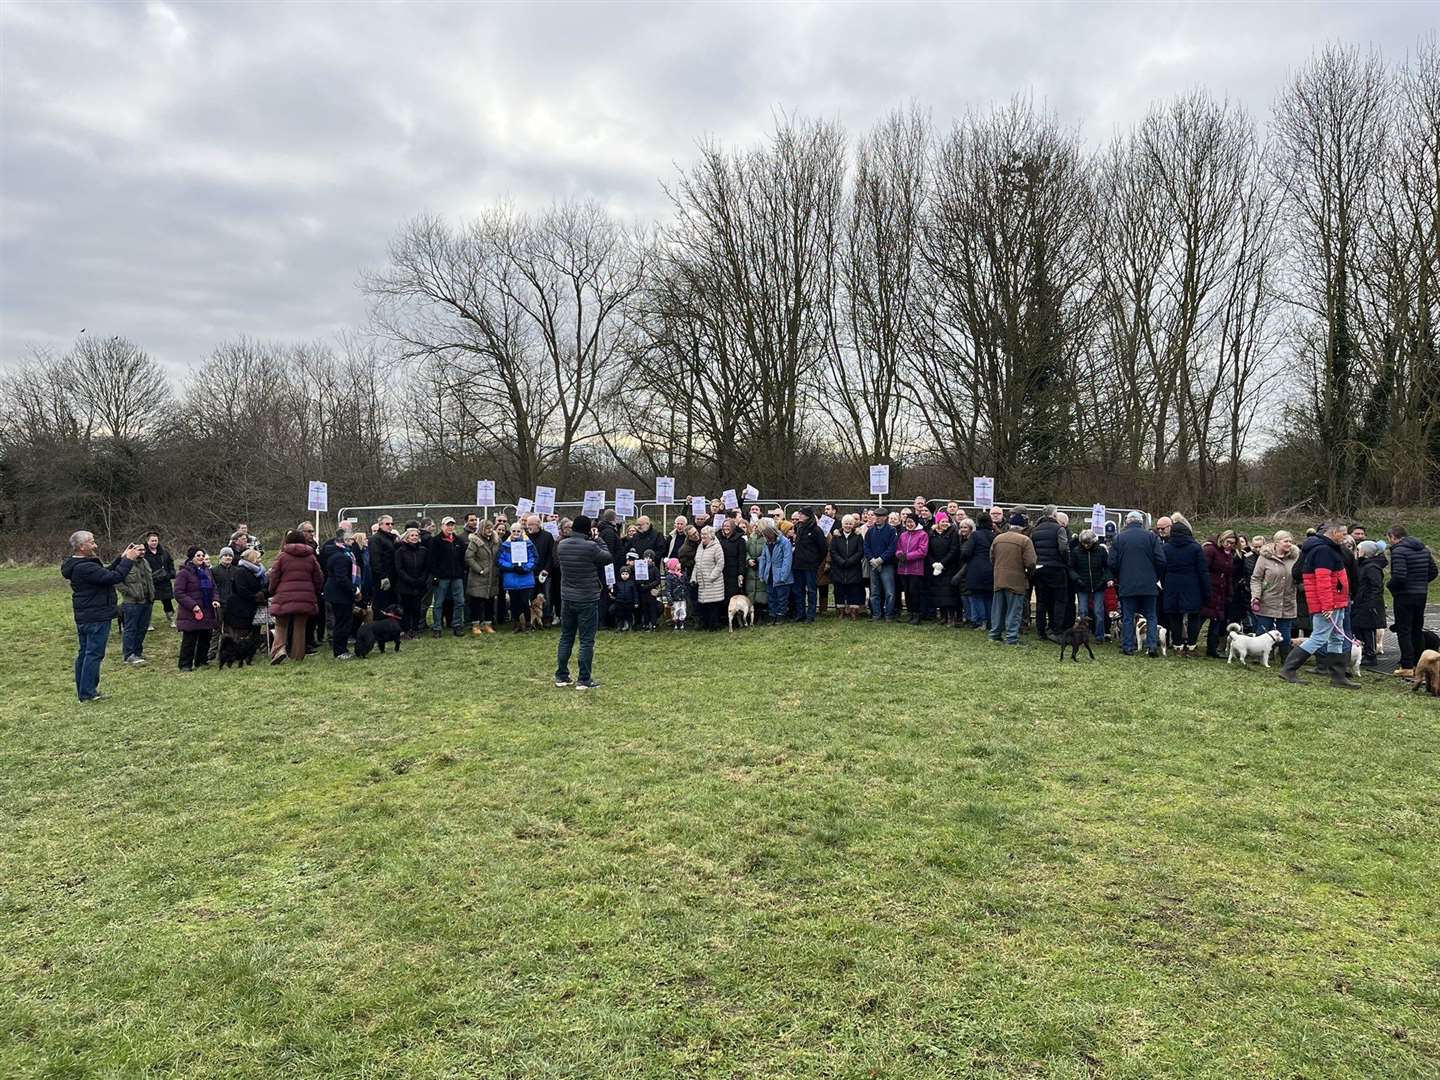 Residents gathered to show their opposition to plans for a mast on land off Bowmans Road, Dartford. Images: @stopbowmansmast